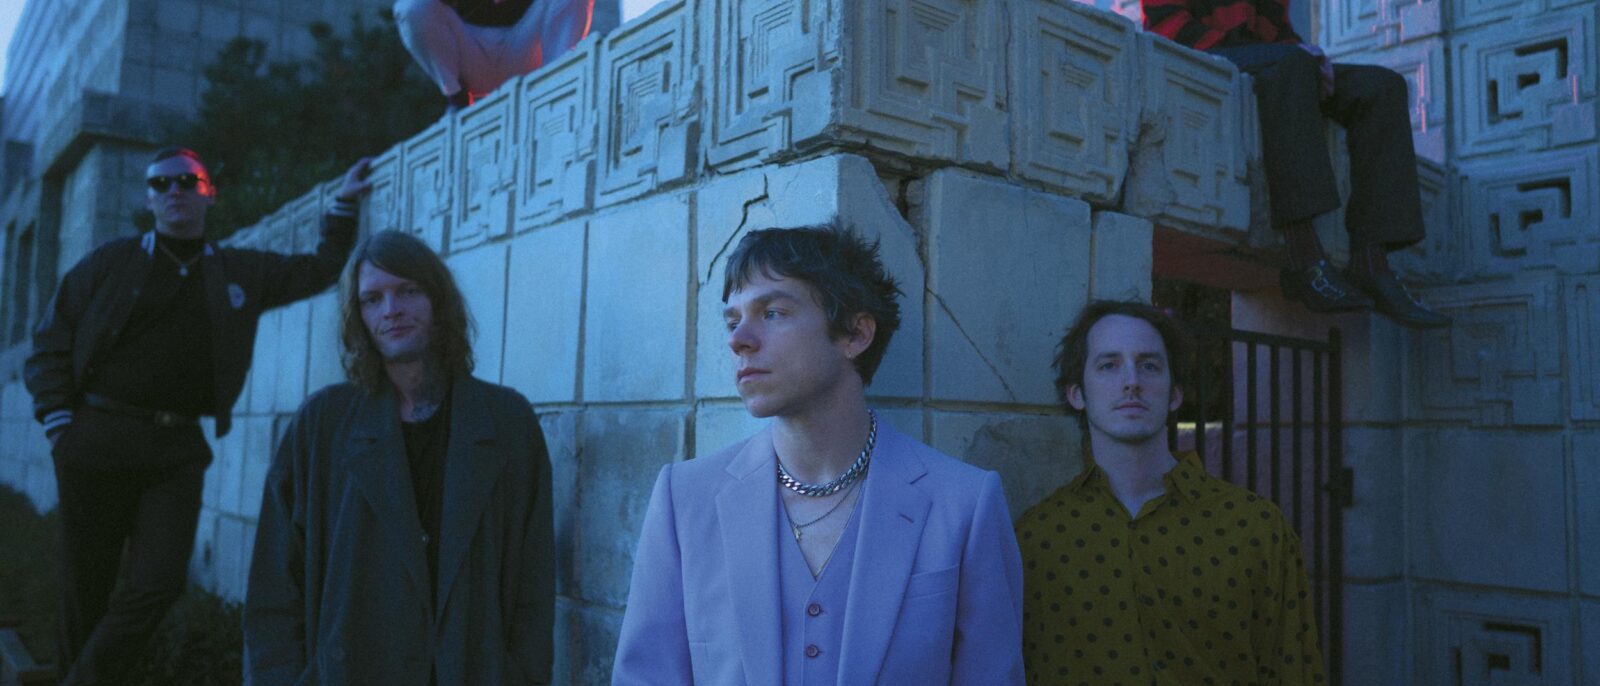 New date set for Cage the Elephant concert at Riverfront Park